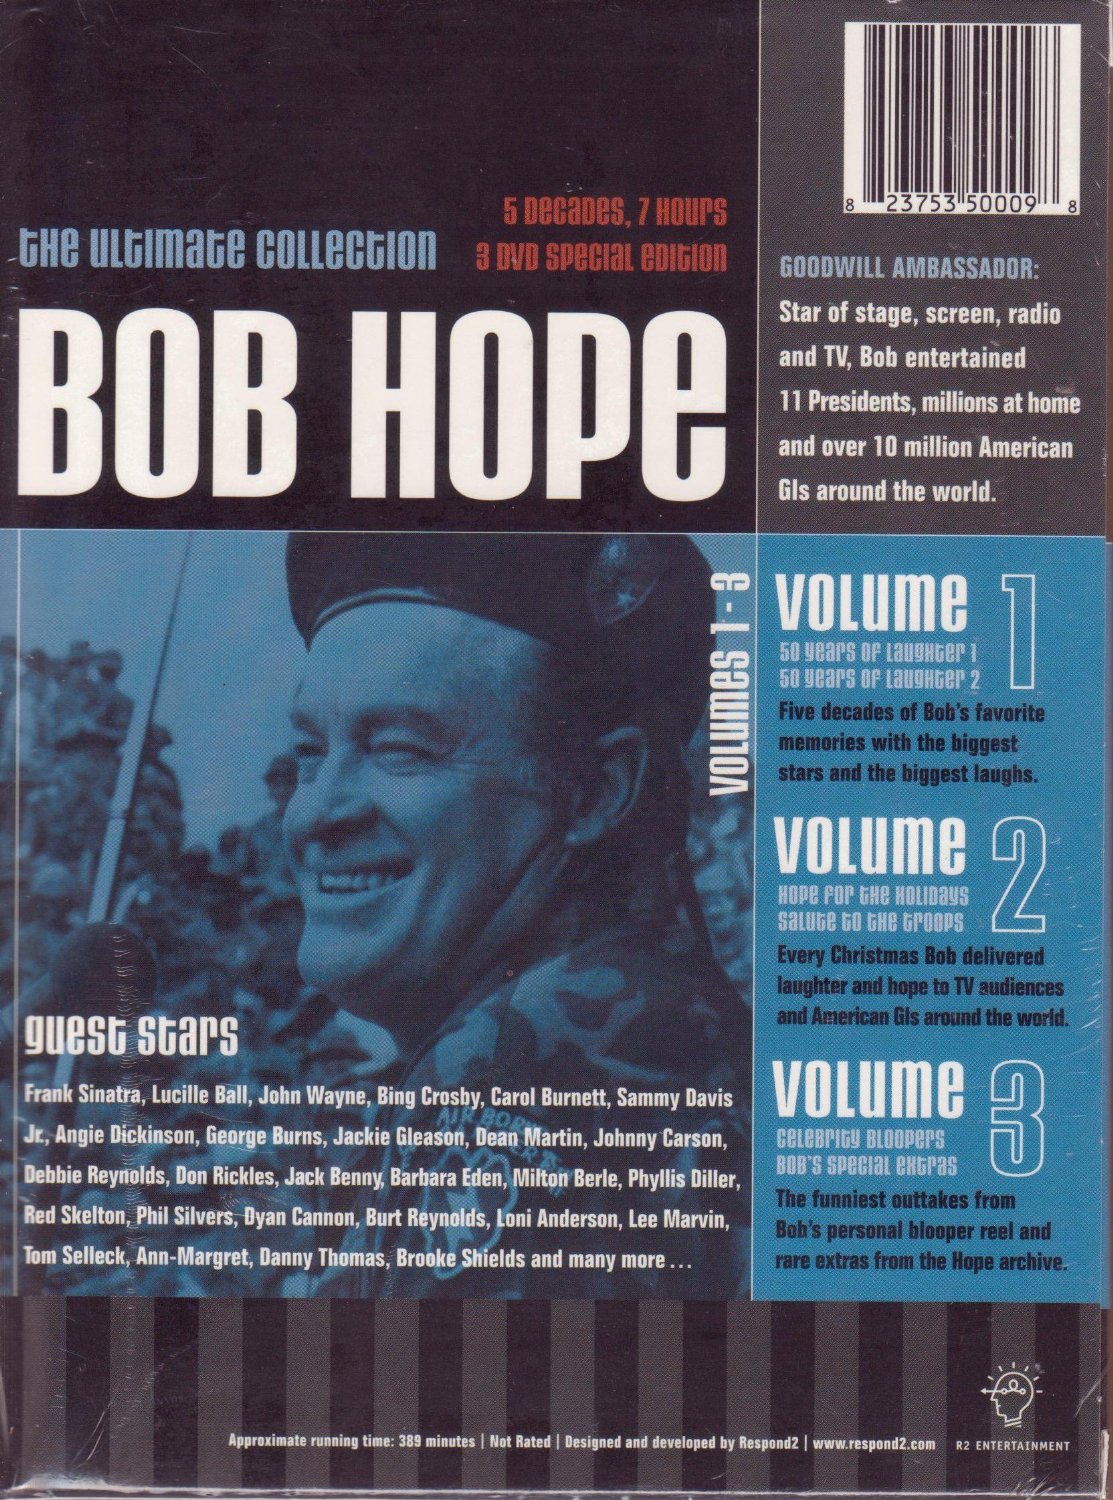 The Ultimate Bob Hope Collection - 3 DVD collection of clips of Bob Hope over the years, including bloopers, outtakes, and movie shorts